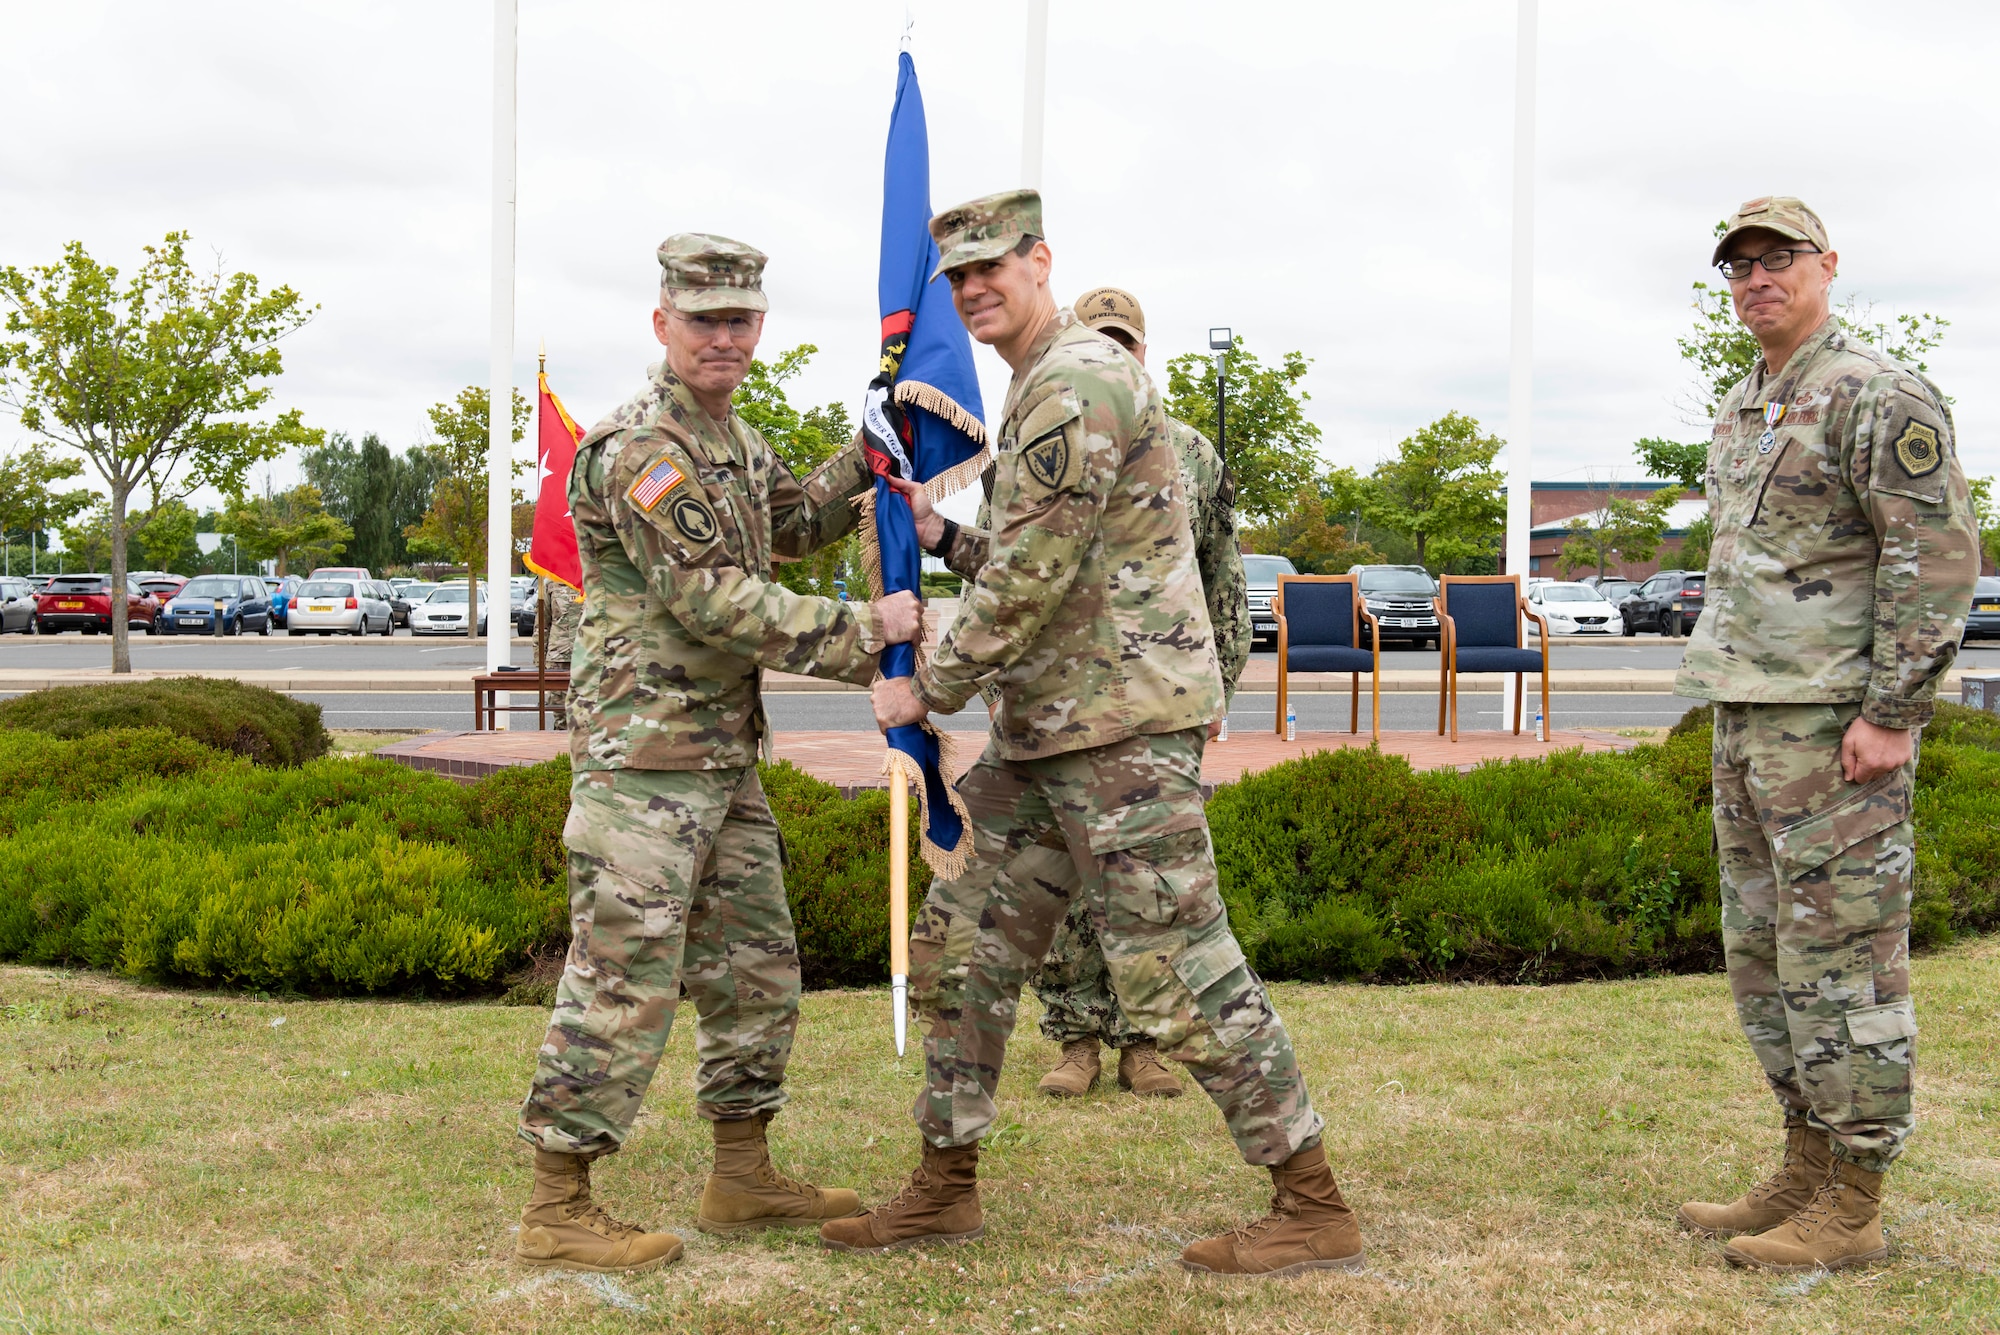 U.S. Army Col. Steven Lacy, right, U.S. European Command Joint Intelligence Operations Center Europe Analytic Center incoming commander, assumes command during the JIOCEUR Analytic Center change of command ceremony at Royal Air Force Molesworth, England, July 7, 2022. The change of command ceremony is rooted in military history dating back to the 18th century representing the relinquishing of power from one officer to another. (U.S. Air Force photo by Senior Airman Jennifer Zima)